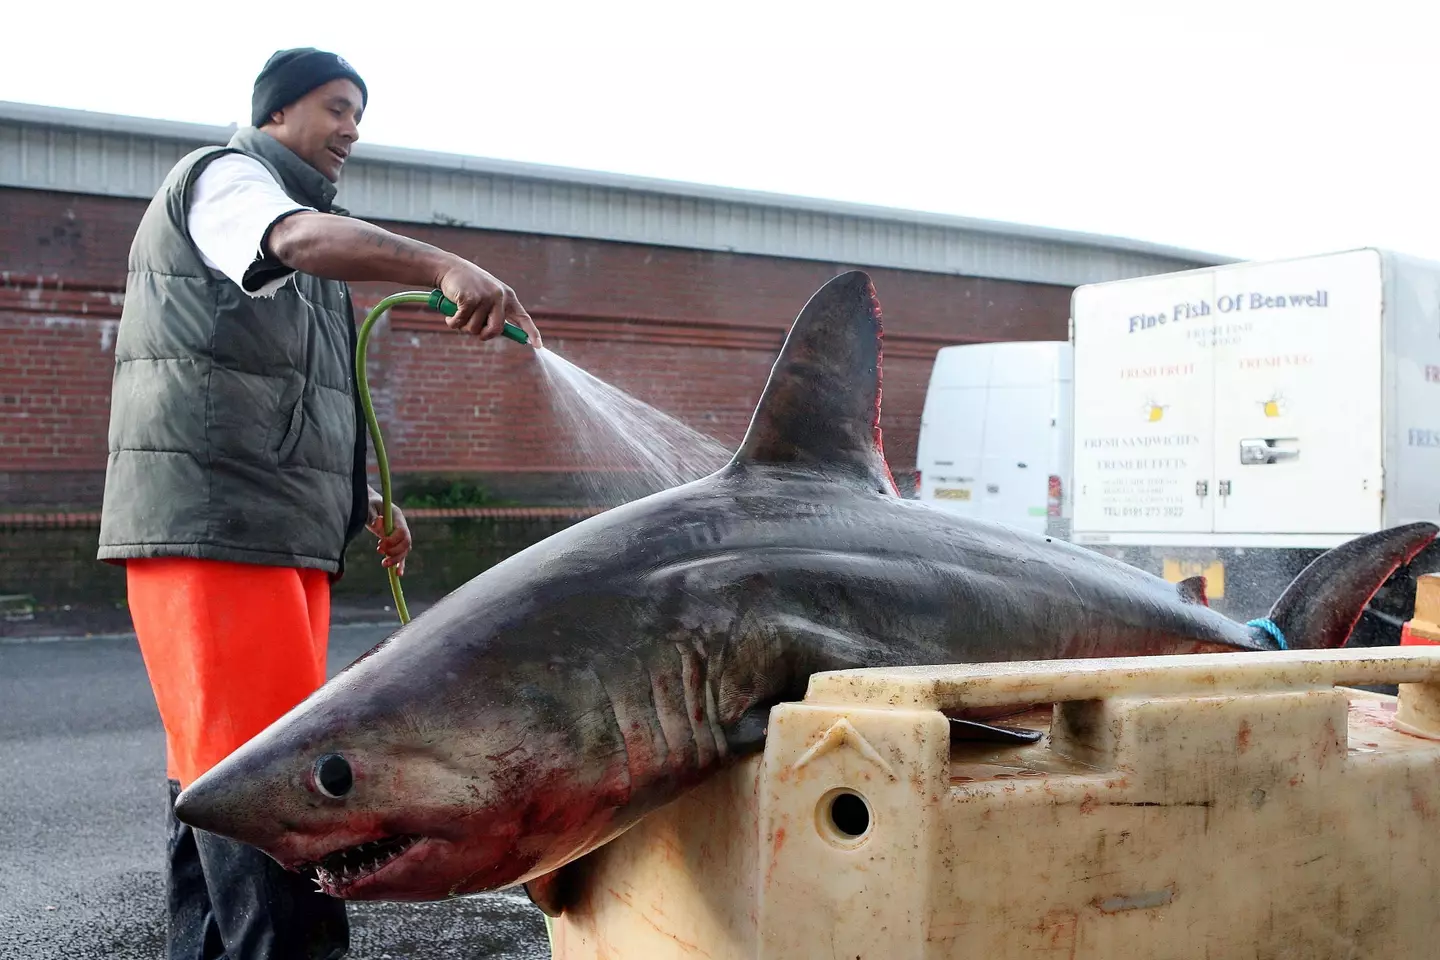 Back in 2007, this massive porbeagle was caught off the coast of Tynemouth (